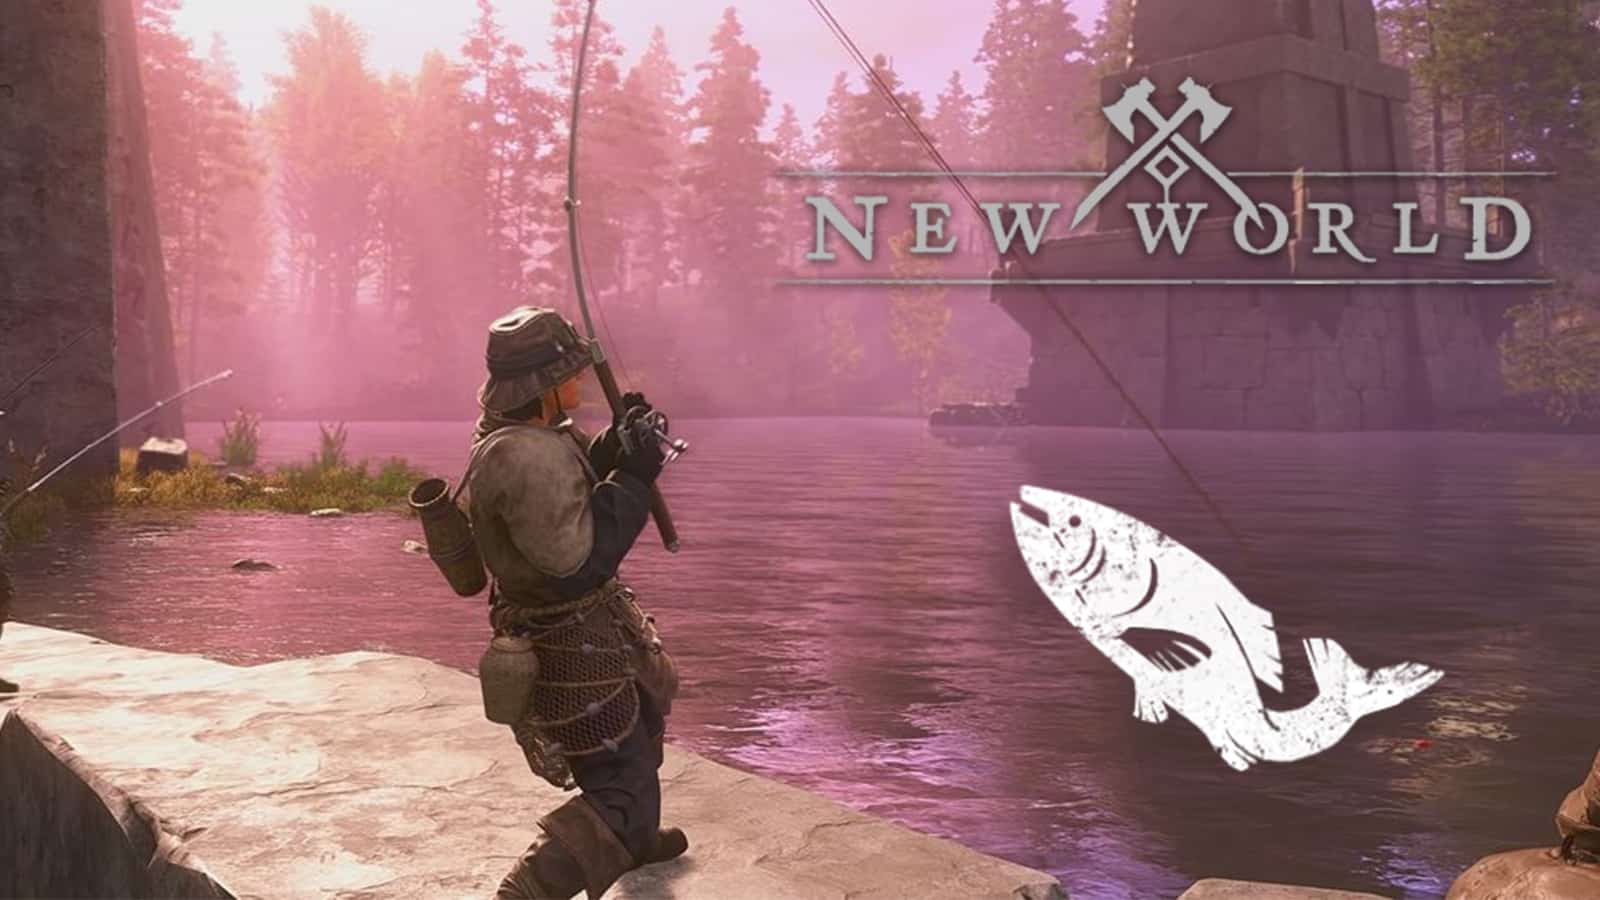 https://editors.dexerto.com/wp-content/uploads/2021/10/05/New-World-players-shows-why-everyone-needs-to-level-up-fishing.jpg